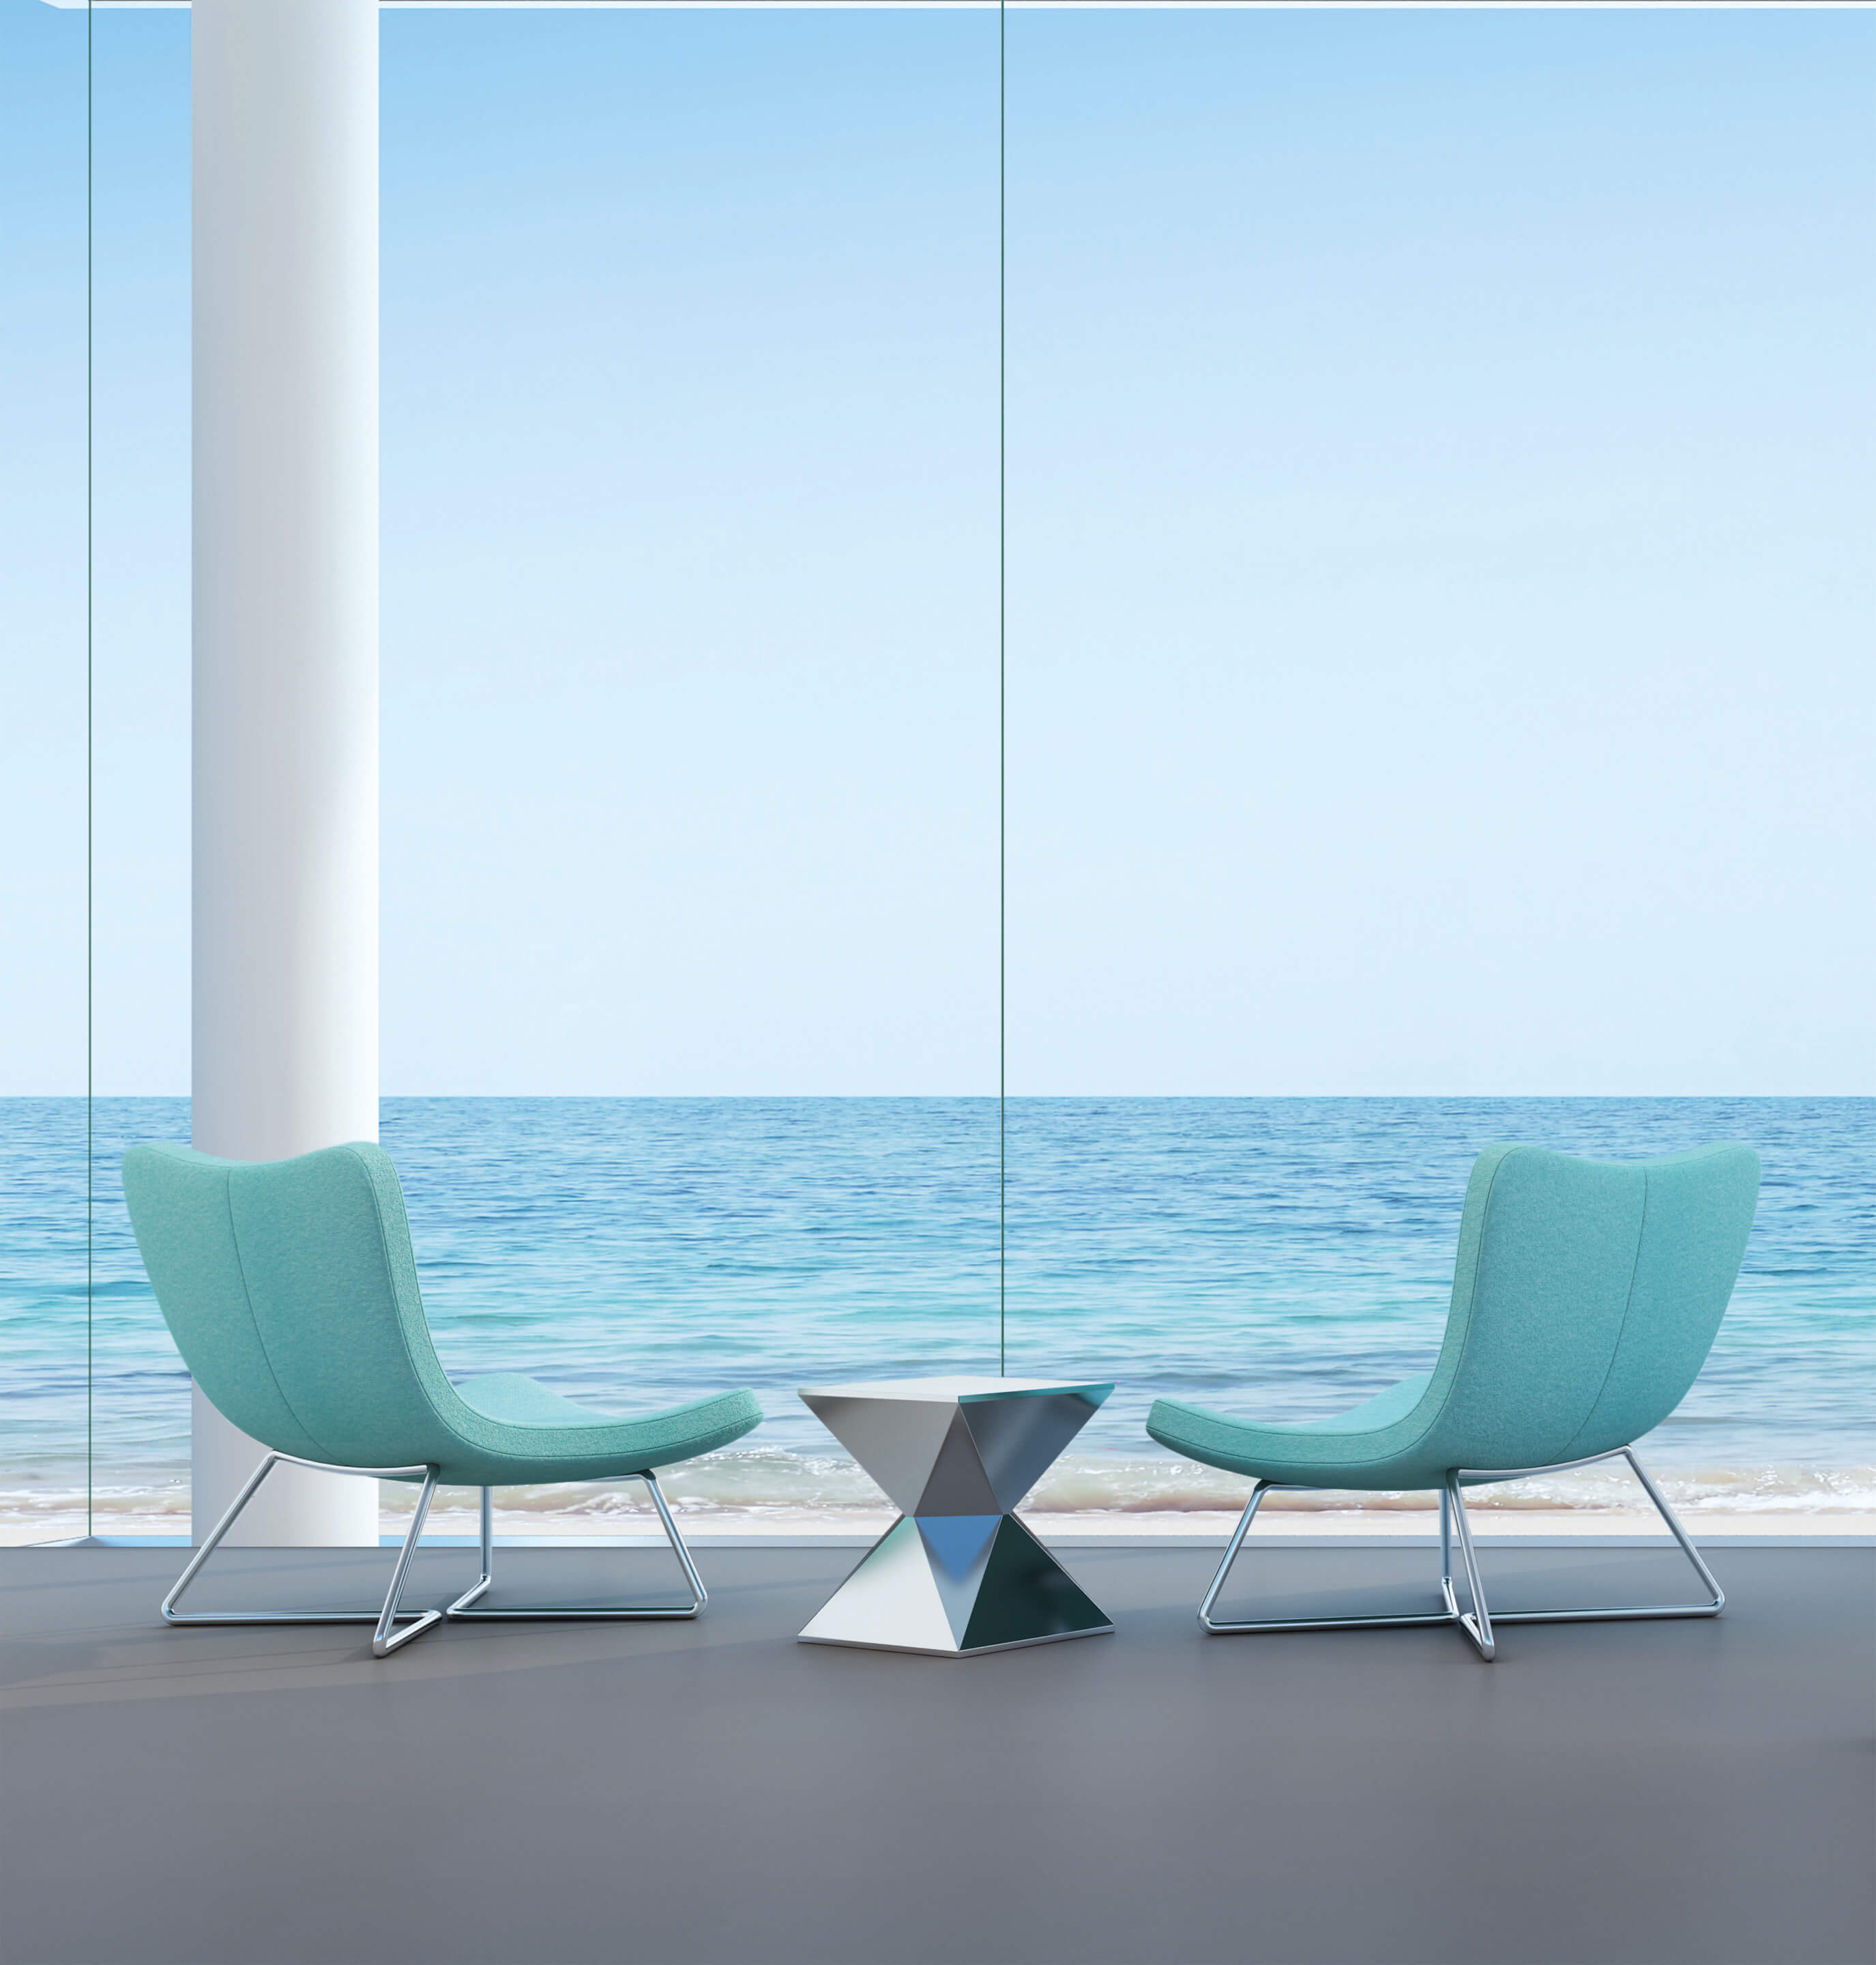 3D rendering of interior with chairs and coffee table in front of the ocean